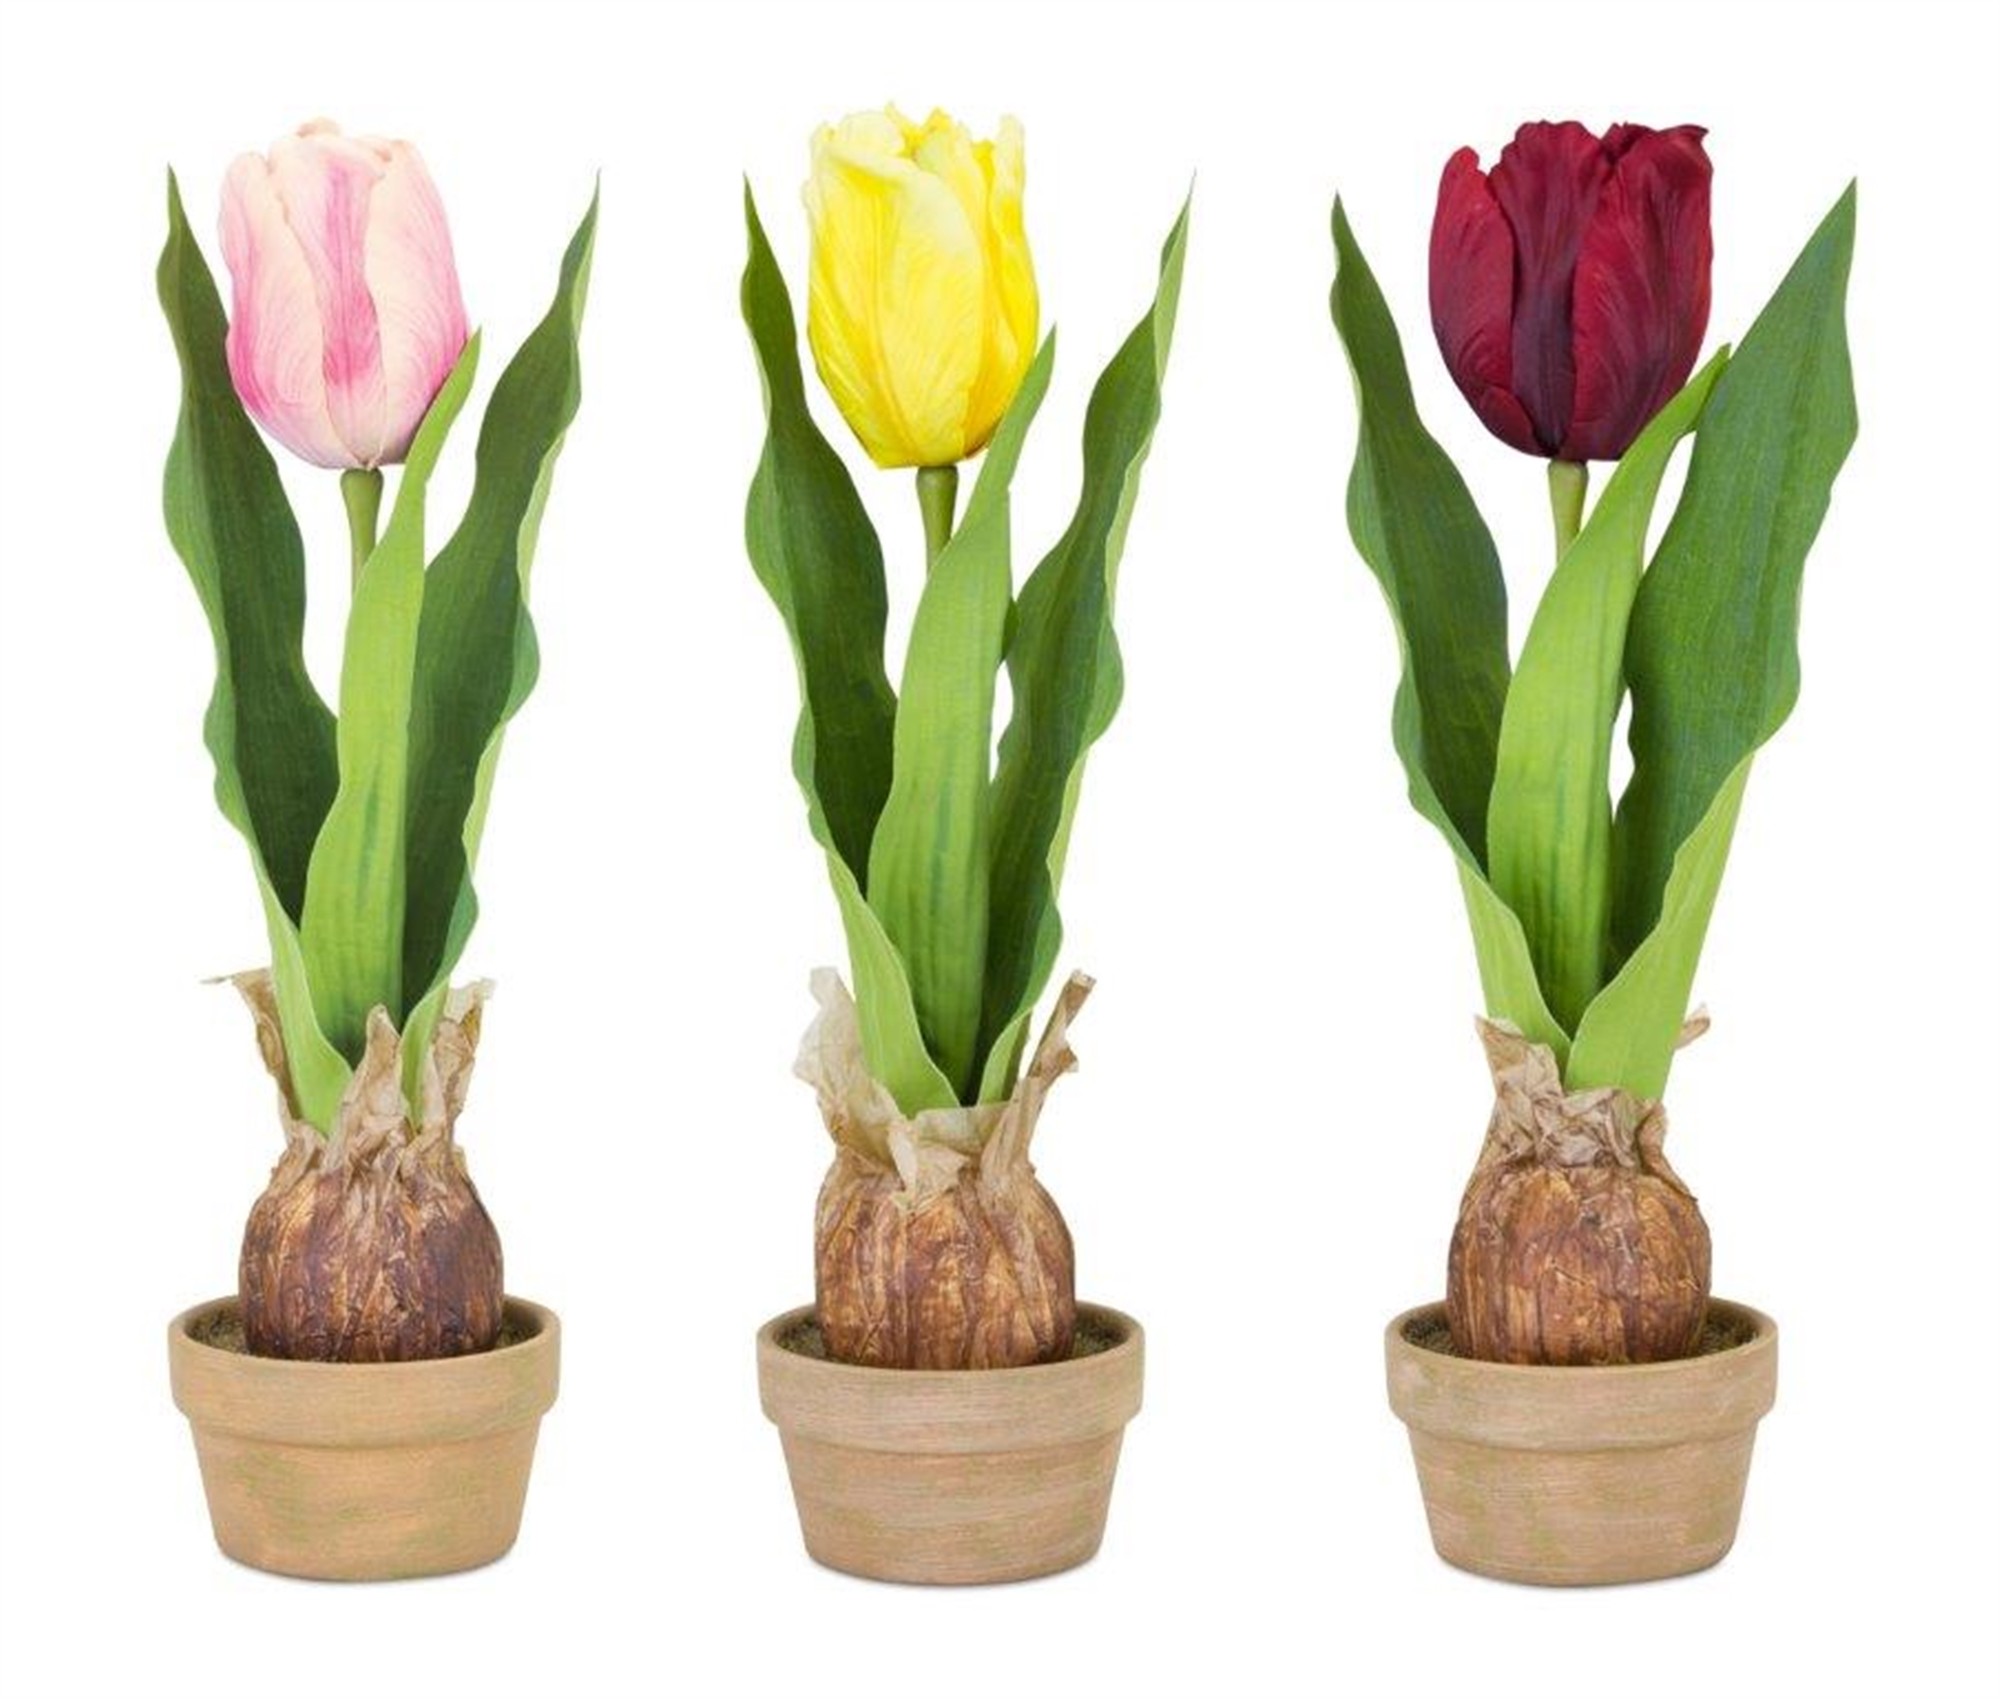 Potted Tulip Bulb (Set of 3) 5.5"L x 13.75"H Polyester/Ceramic